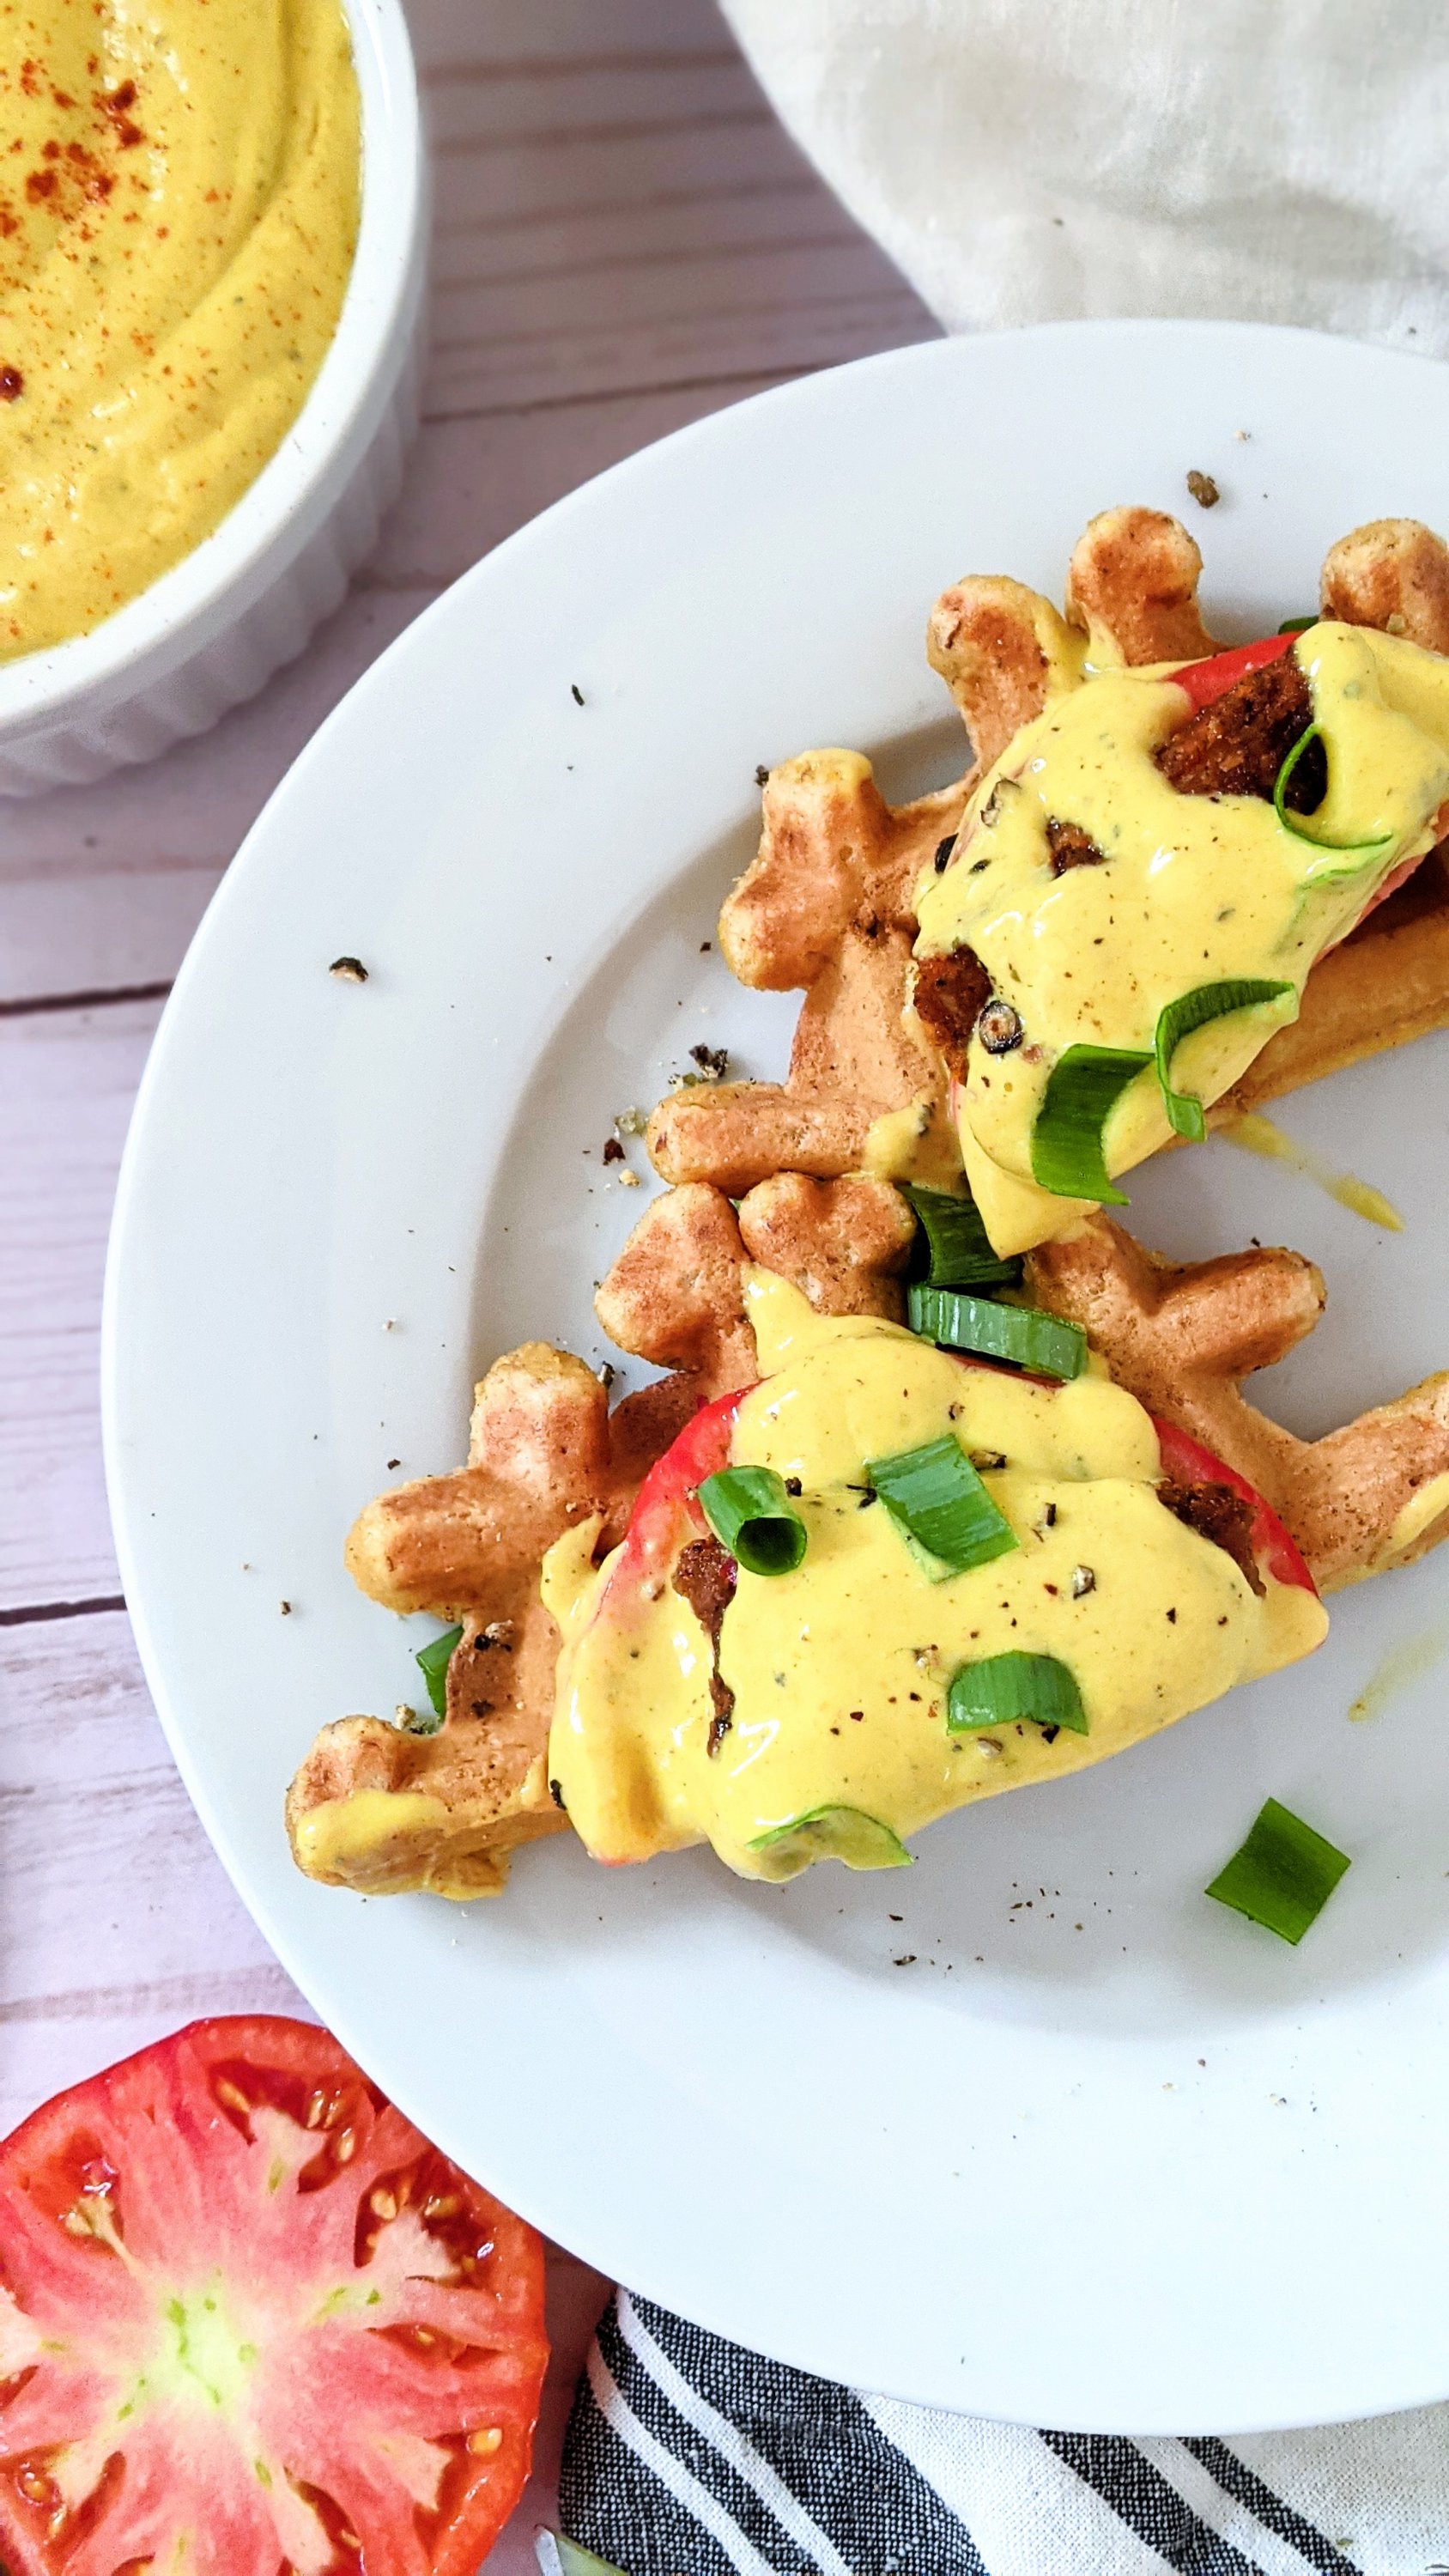 vegan waffle eggs benedict recipe on cornbread waffles vegetarian brunch recipes southwest spiced tofu on corn bread waffles with a chickpea hollandaise sauce and sliced tomato on eggs benedict vegan